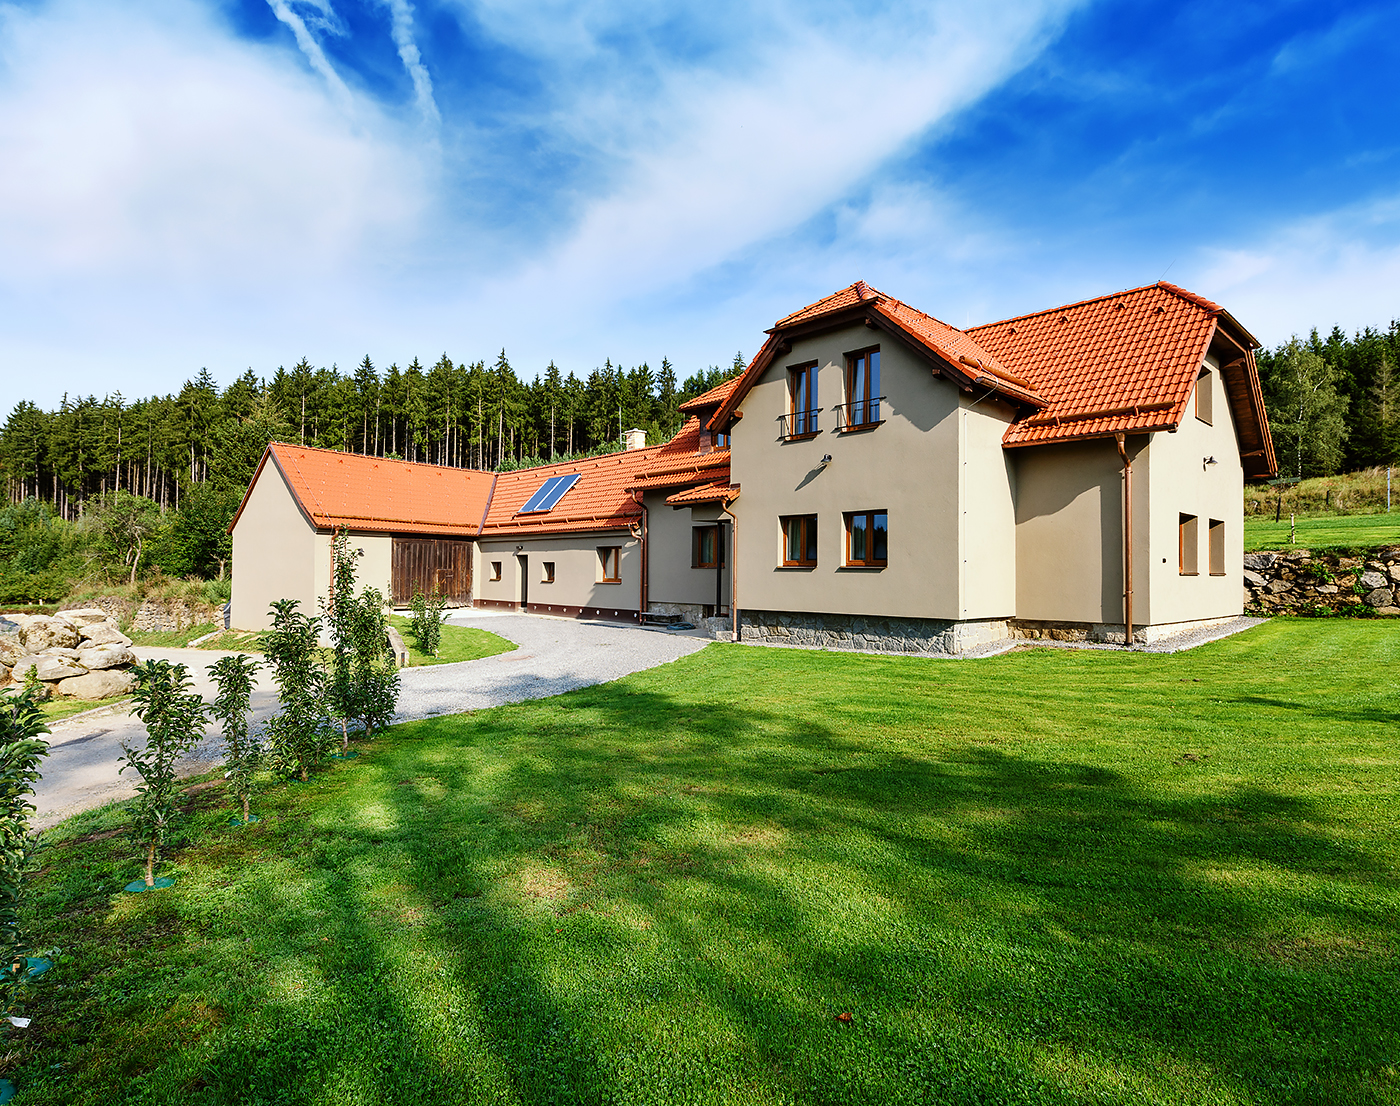 House for rent, accommodation south Bohemia